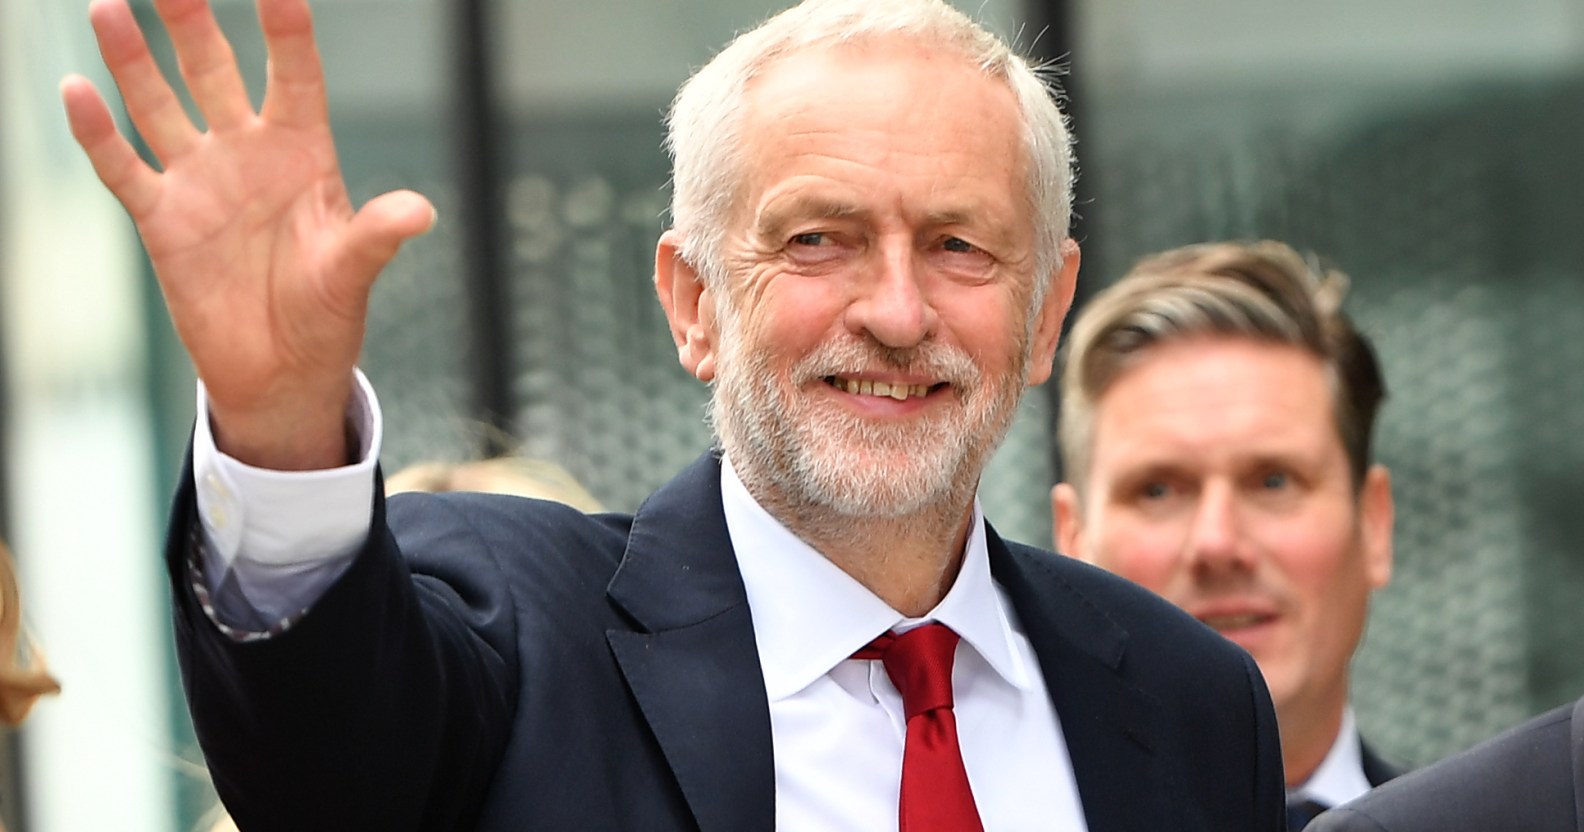 Labour Party leader Jeremy Corbyn waves as he arrives during the Labour Party conference on September 26, 2018. (Anthony Devlin/Getty Images)